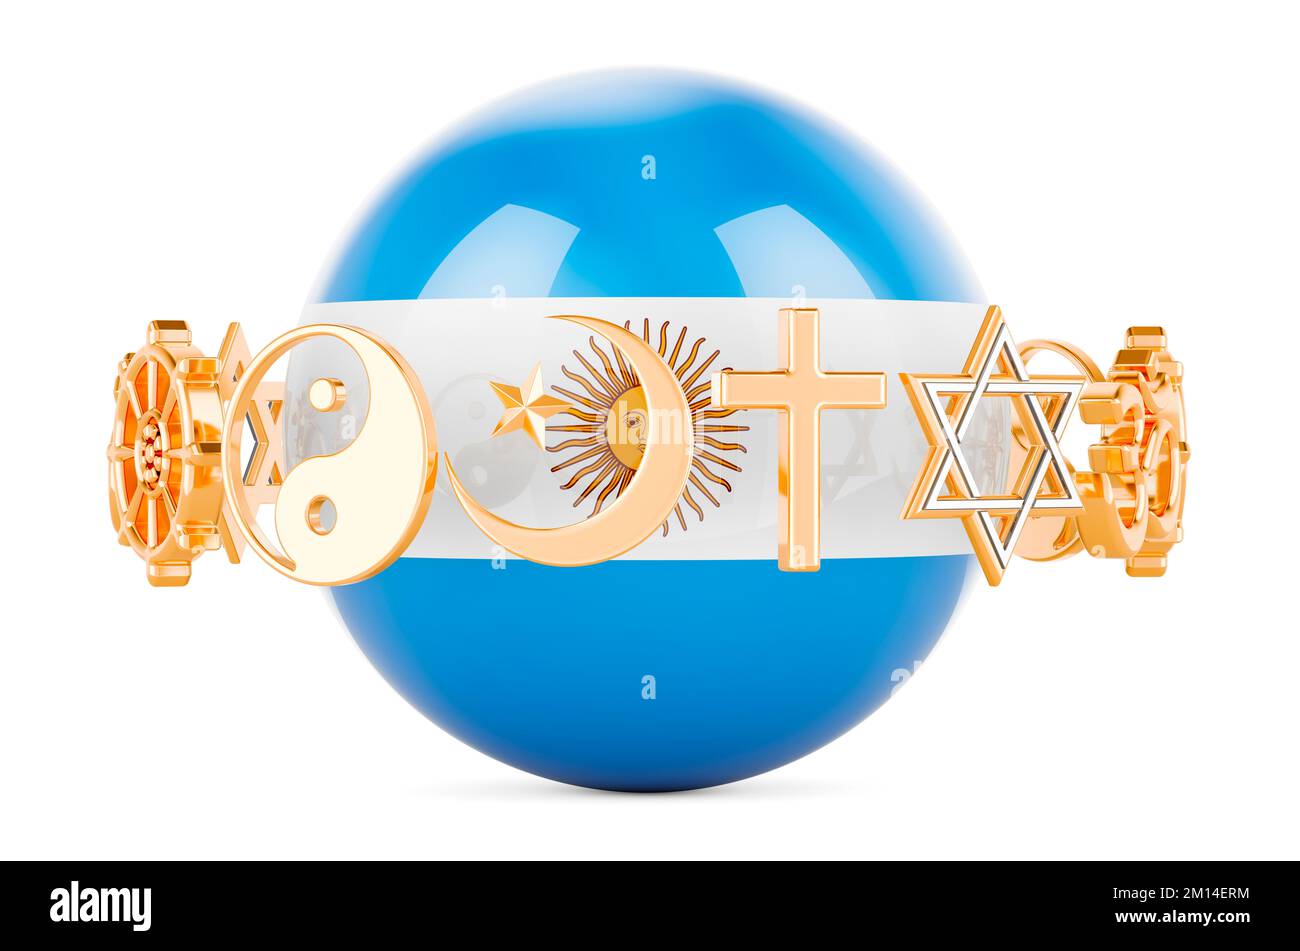 Argentinean flag painted on sphere with religions symbols around, 3D rendering isolated on white background Stock Photo